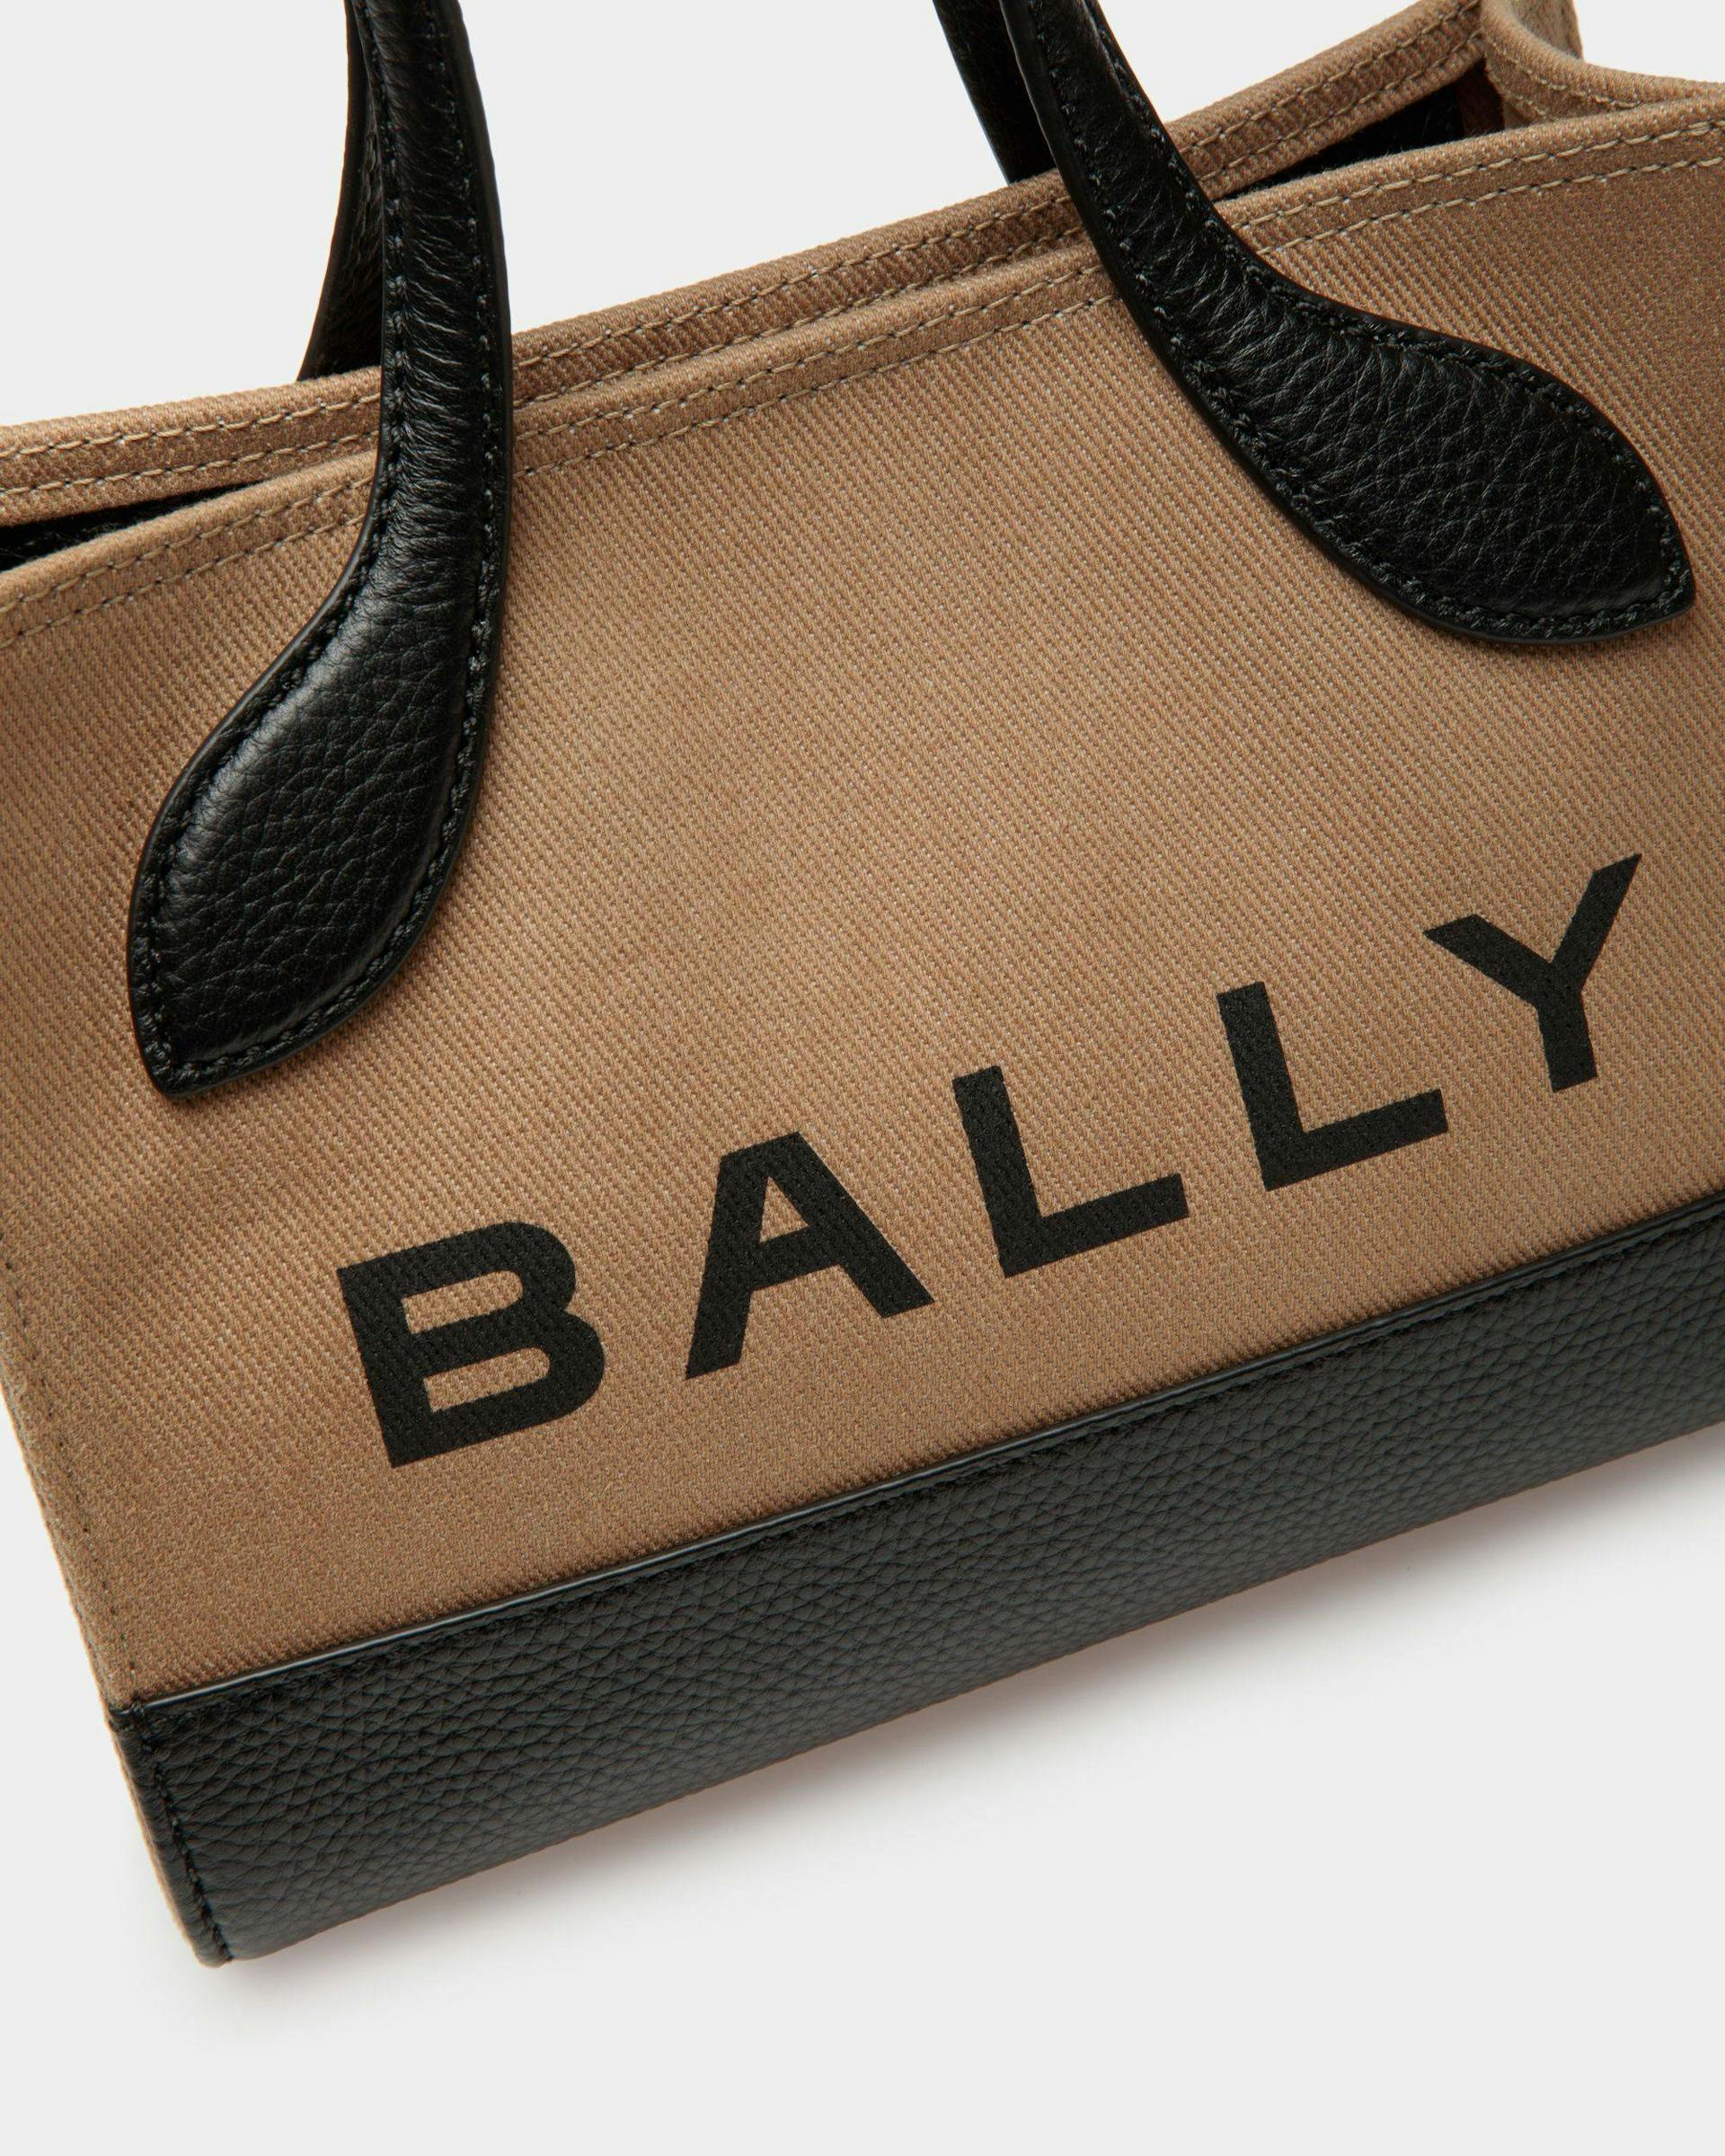 Women's Bar Minibag In Sand And Black Fabric | Bally